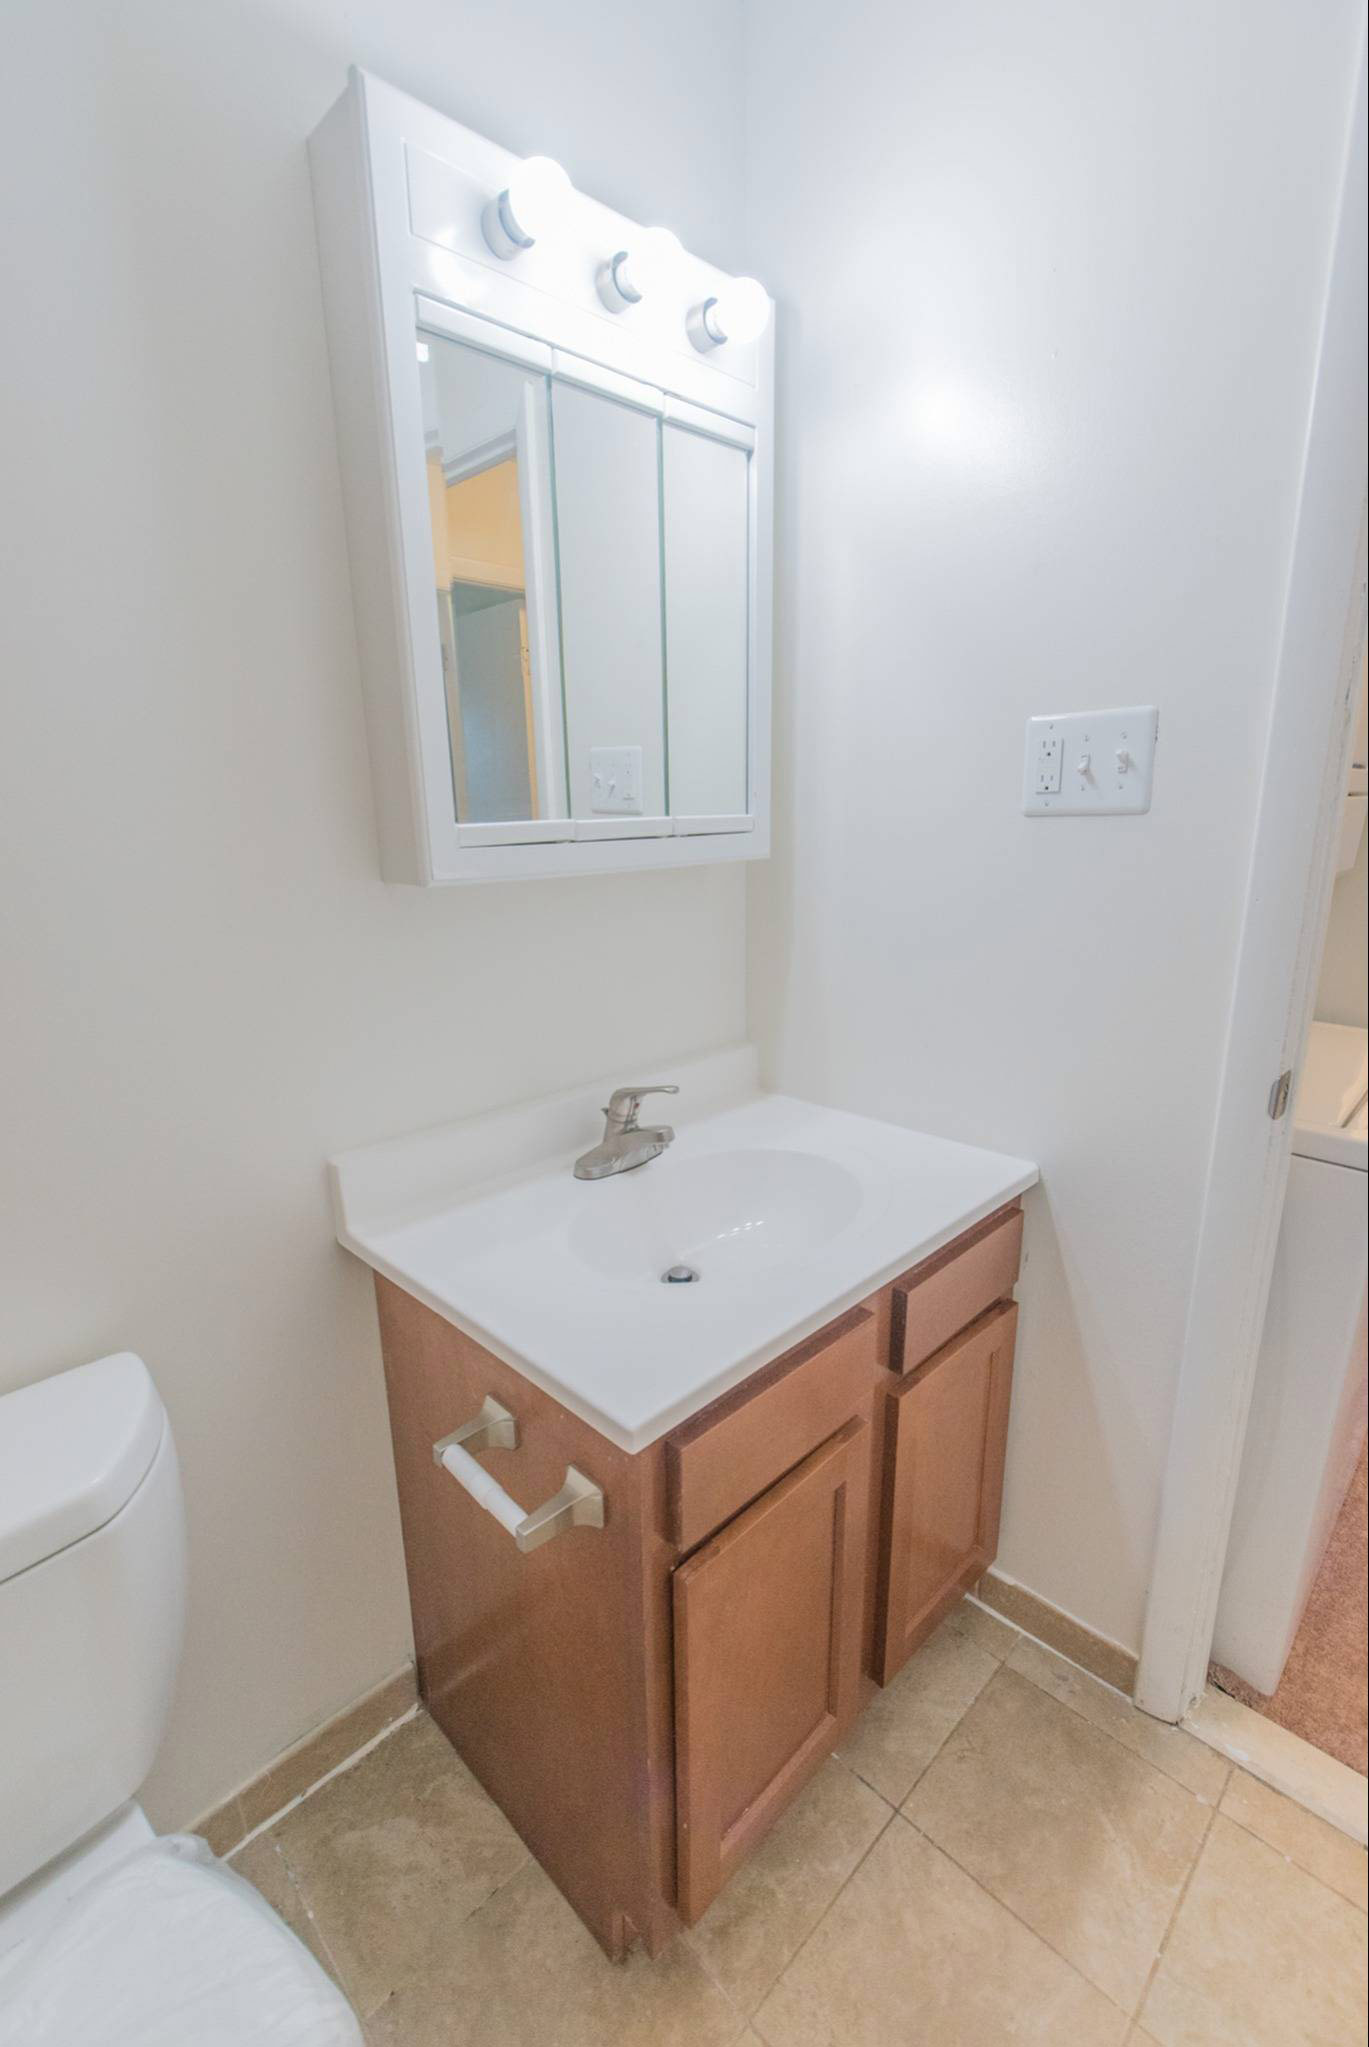 Bathroom with a sink, mirror, and toilet.